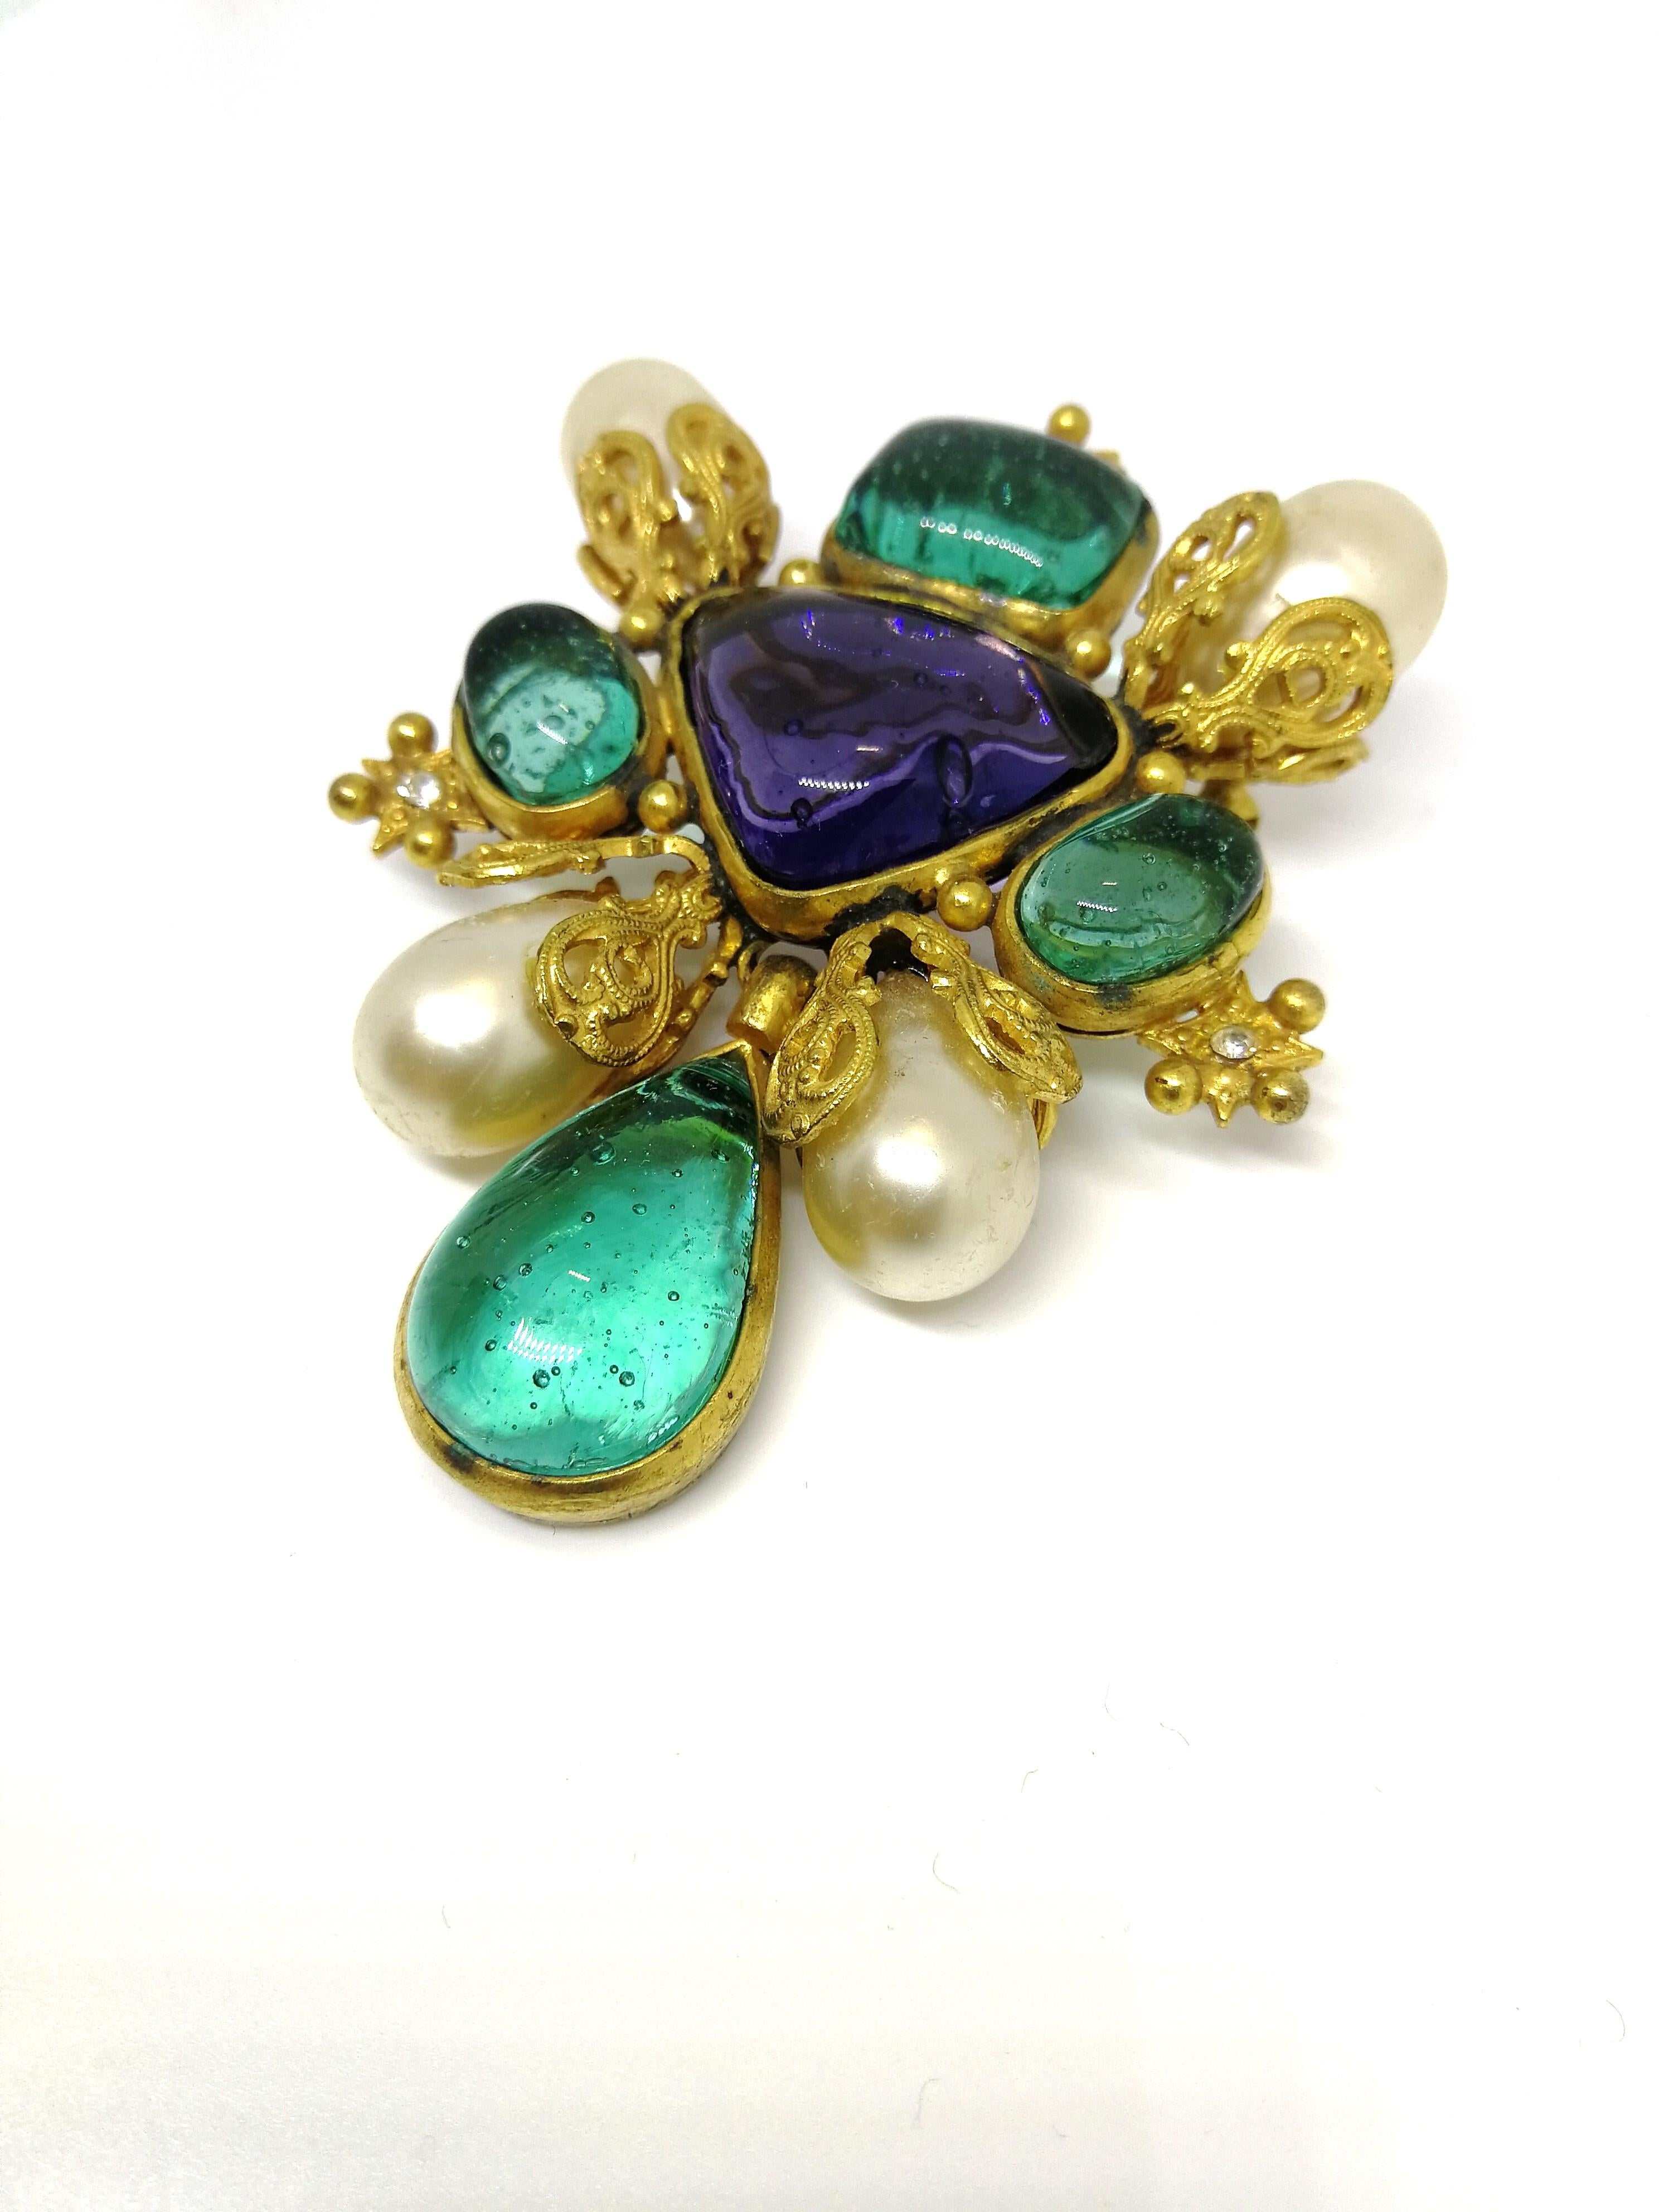 This is a very beautiful brooch, classic Chanel, and an exceptional design by Victoria de Castellane for Chanel. Designed with signature gilt filigree caps, in which sit  baroque pearls, and emerald and amethyst poured glass cabuchon panels and